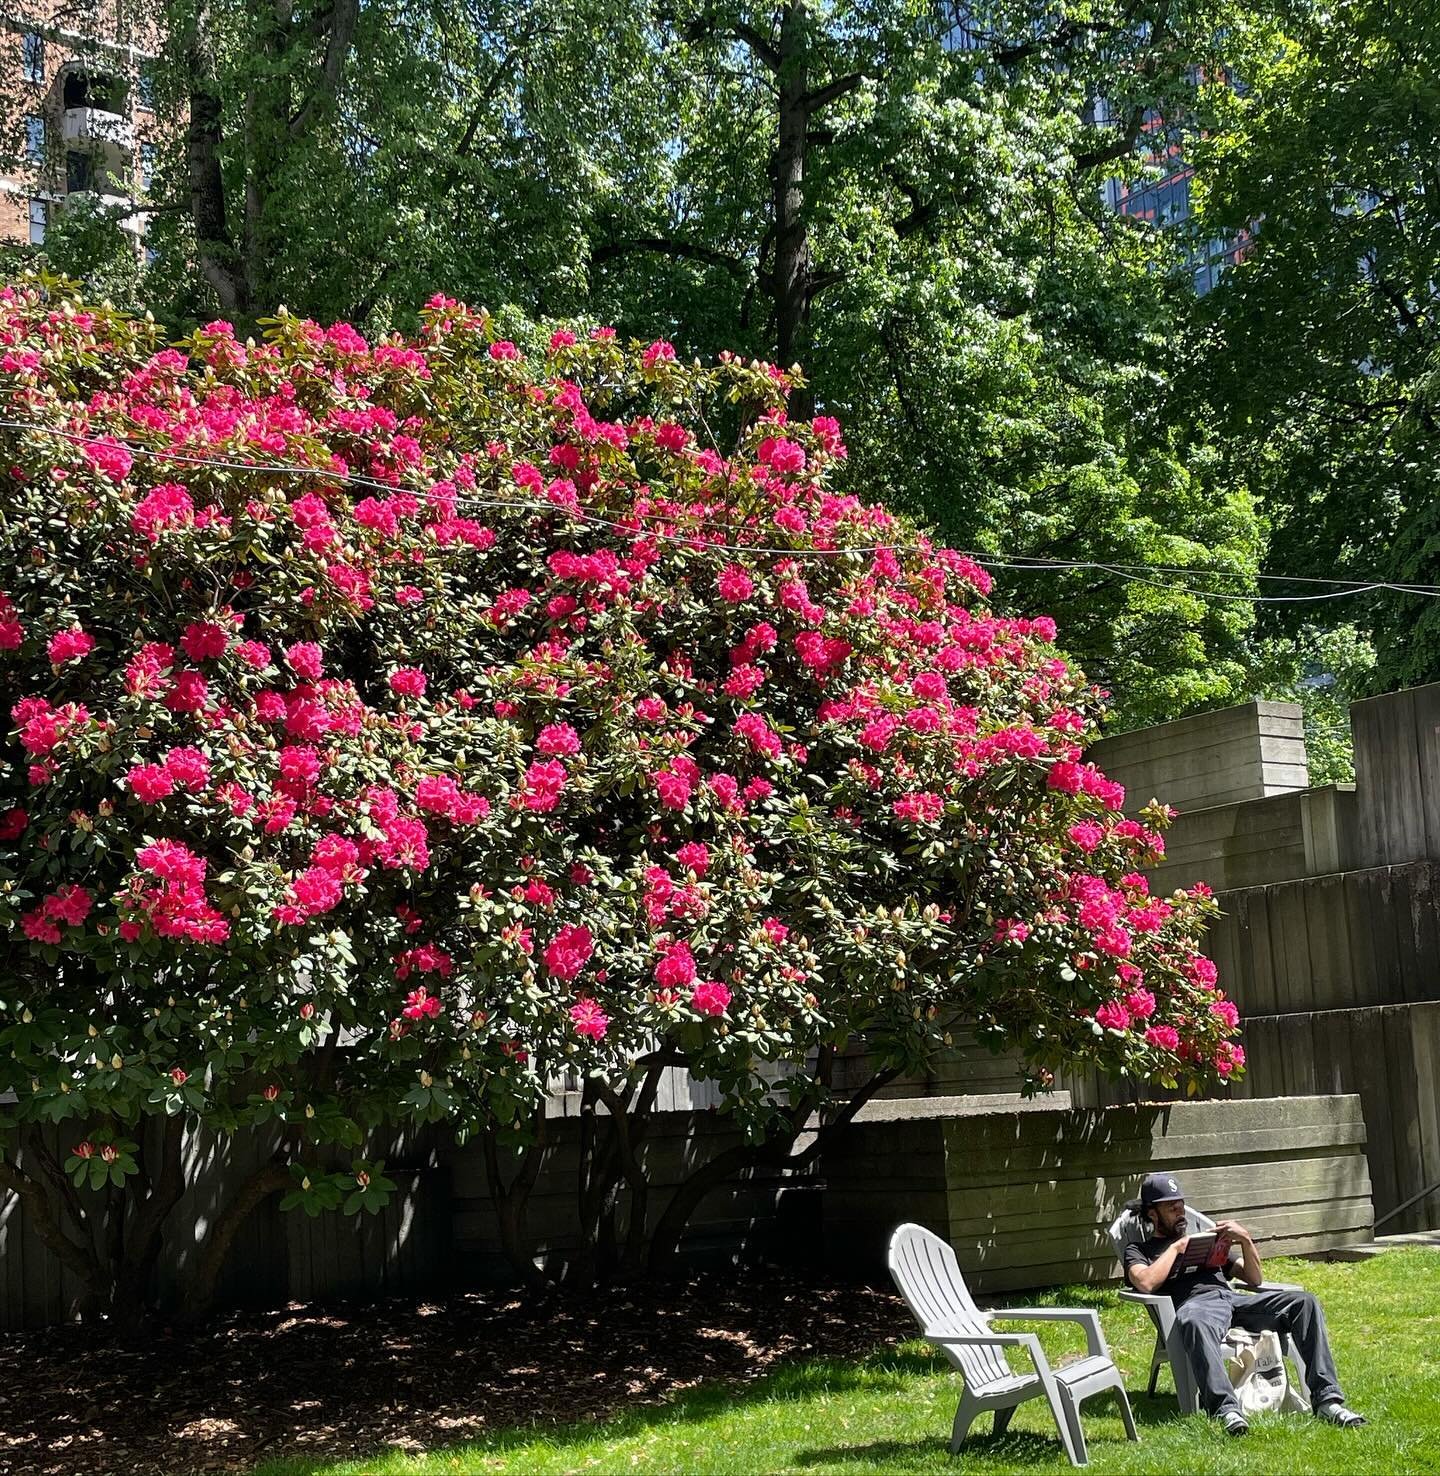 She is blooming! Our favorite rhododendron tree within Seneca Plaza has finally sprouted. Come for a stroll to see it and enjoy the various, Spring blooms throughout the Park. 🌺